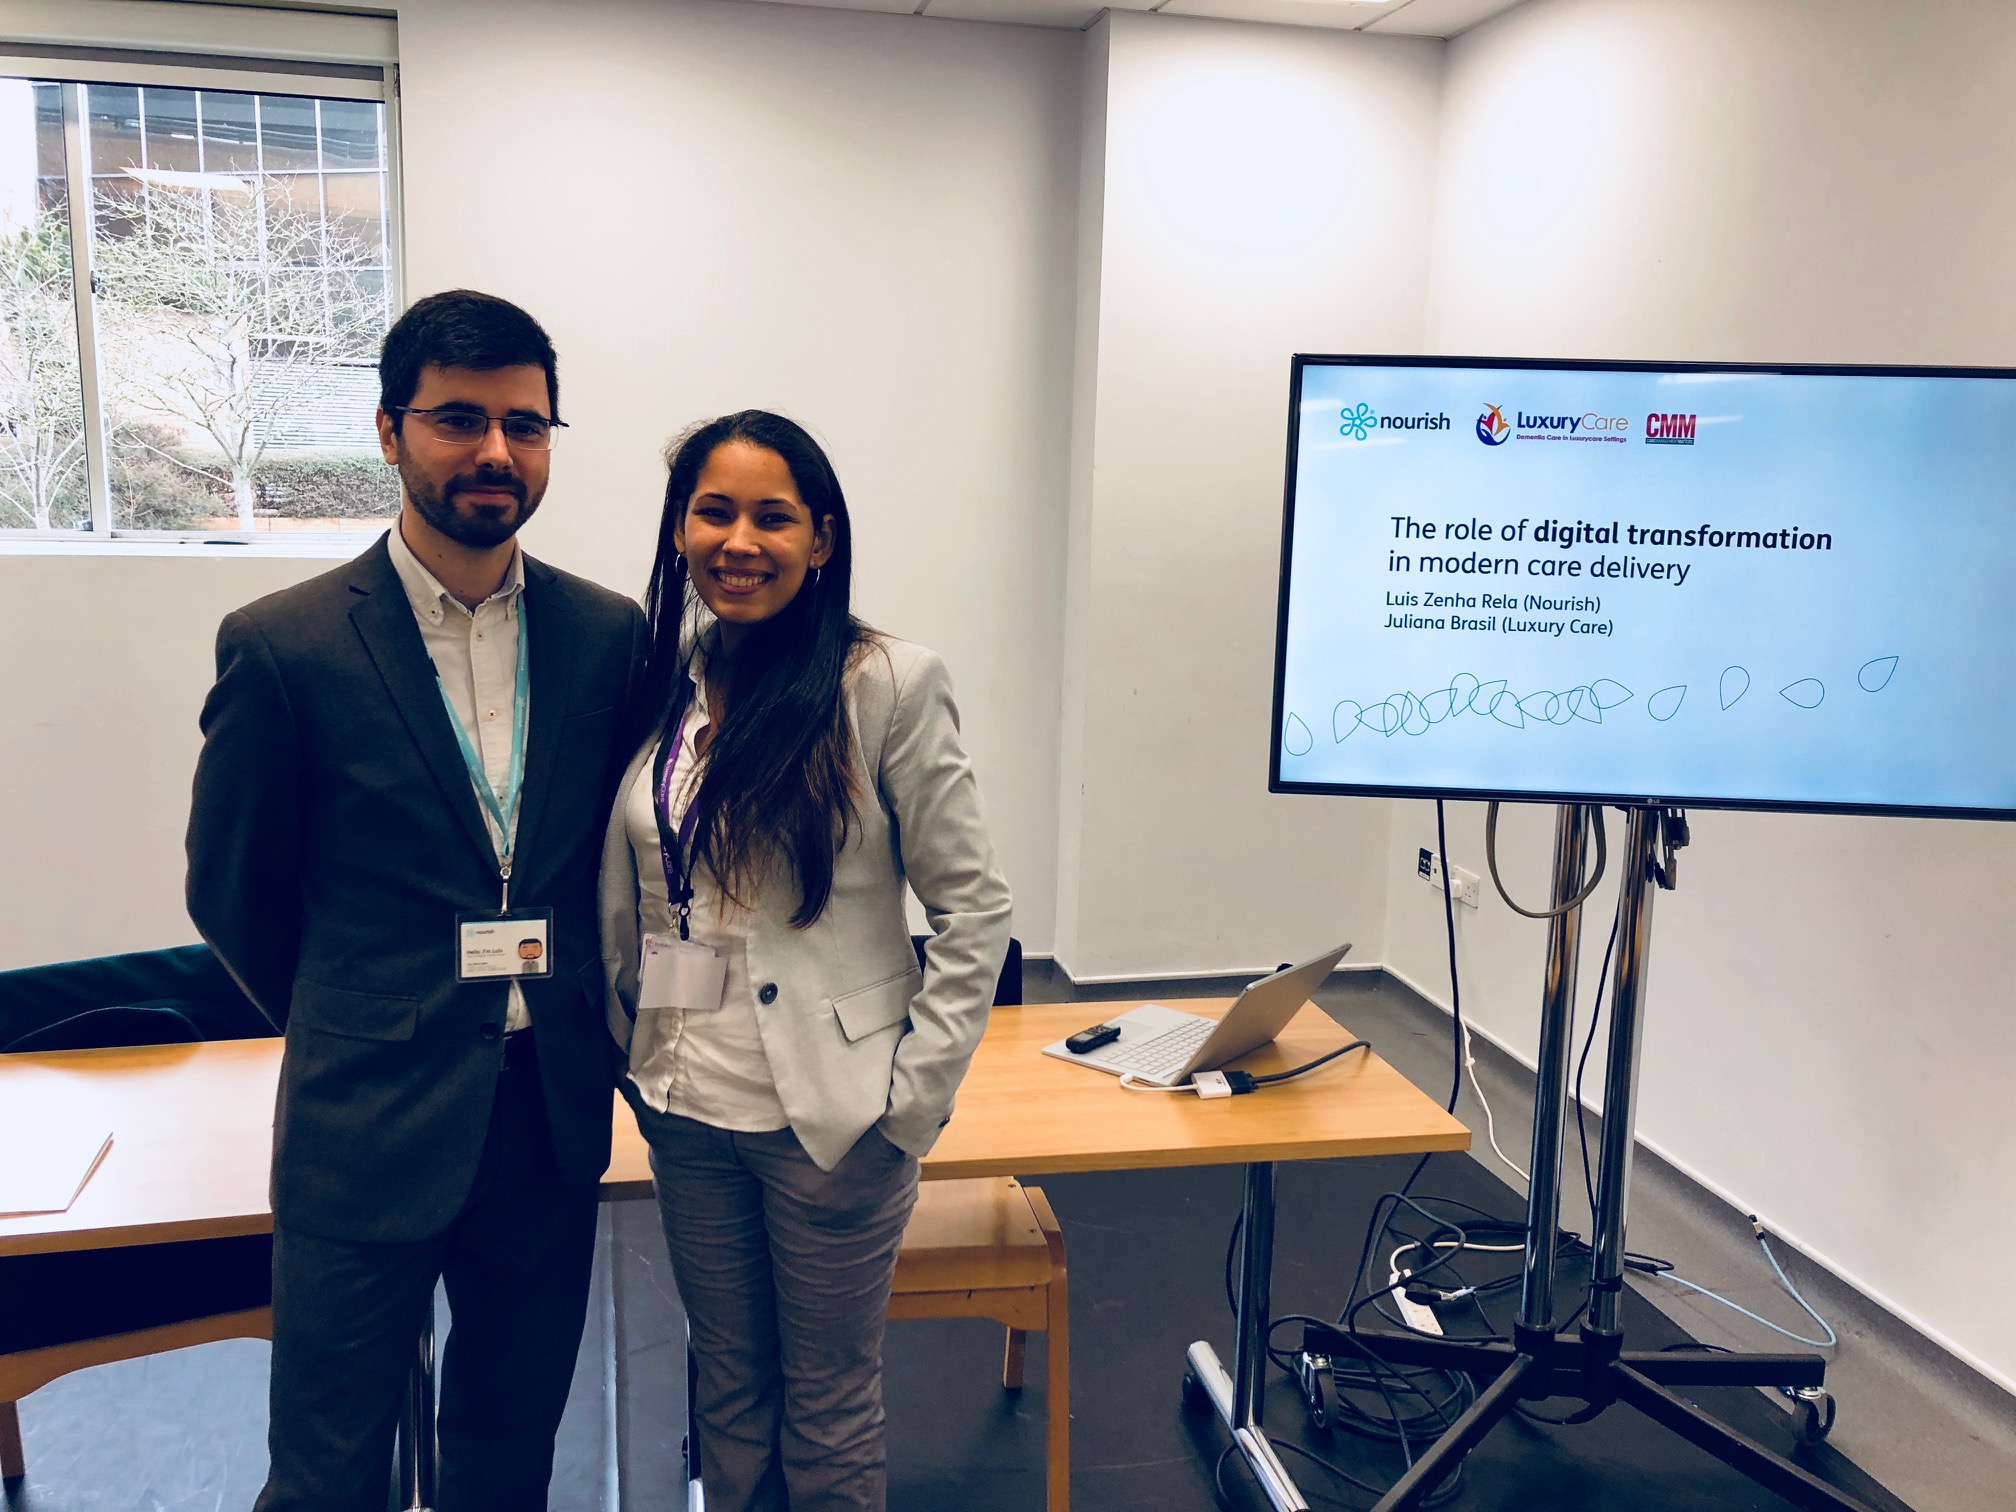 Luis and Juliana present on the role of digital care management